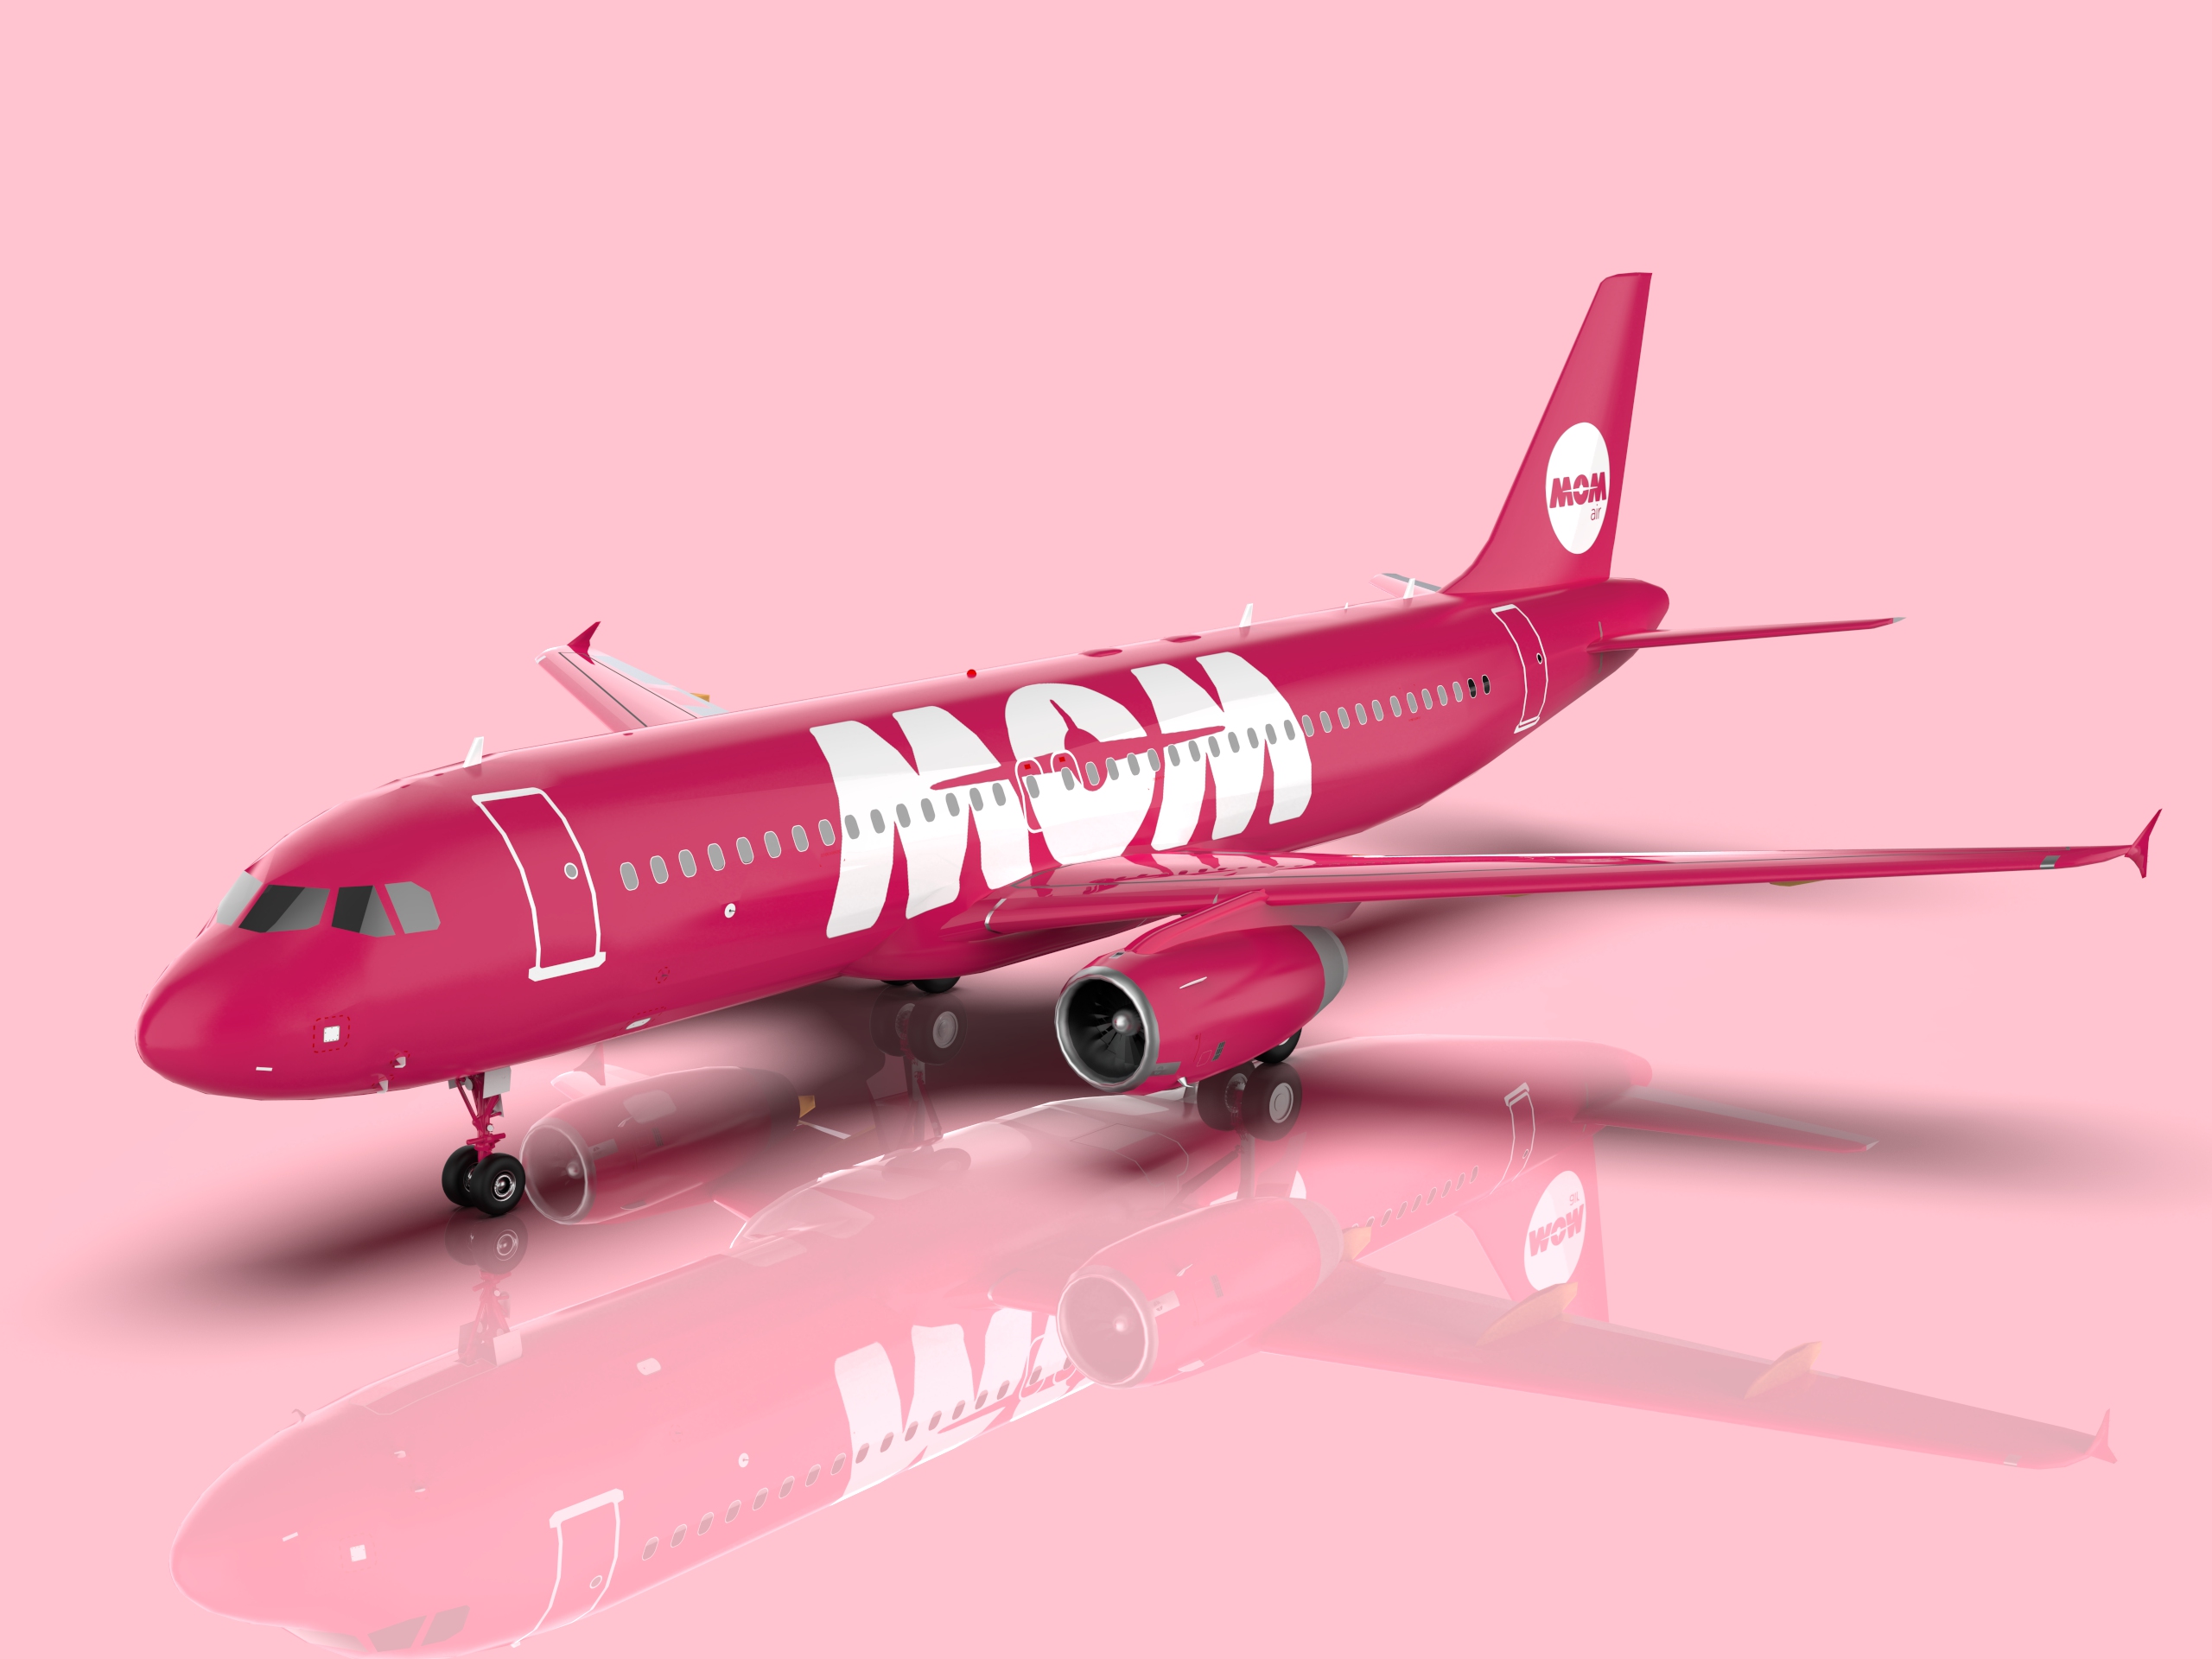 a pink airplane with white text on it